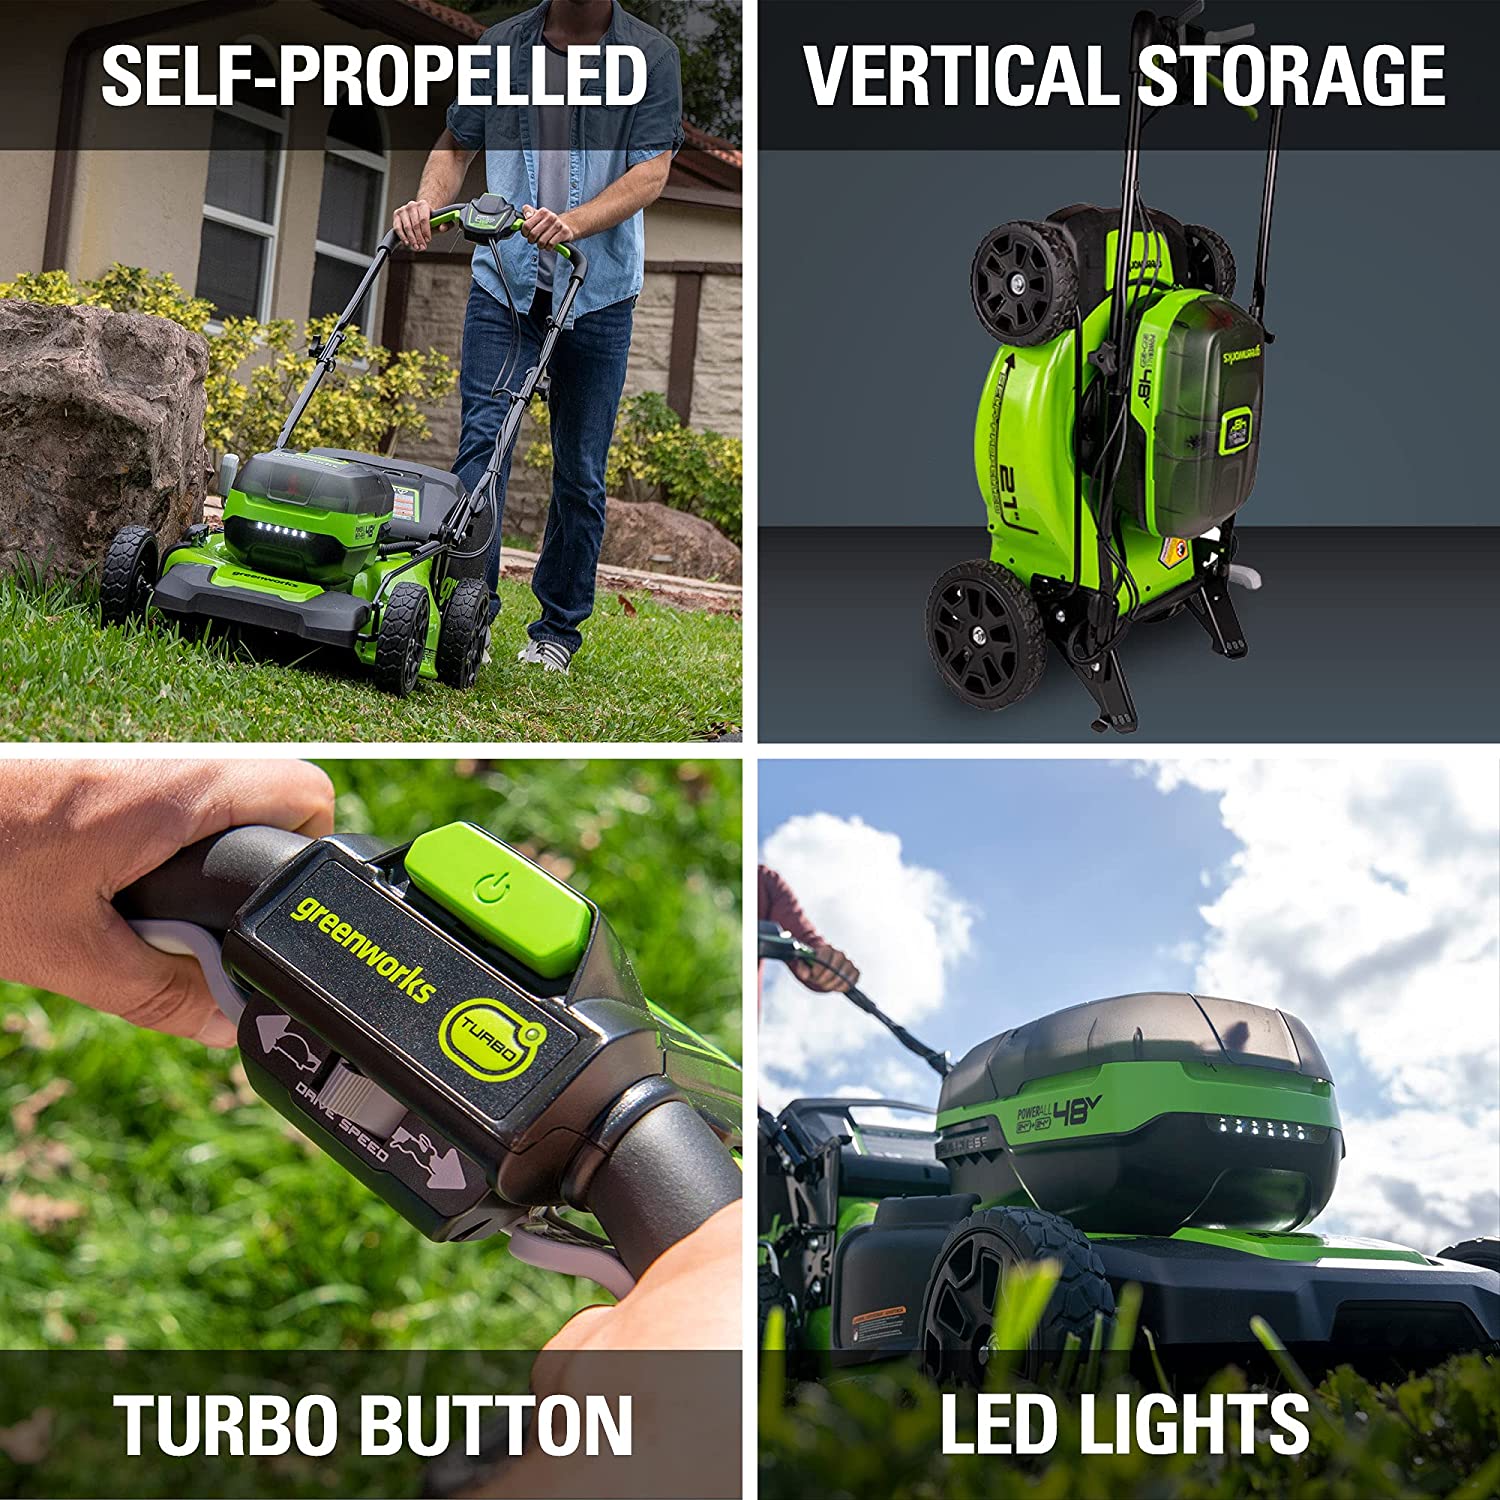 Greenworks end of the year electric tool clearance sale, e-bikes